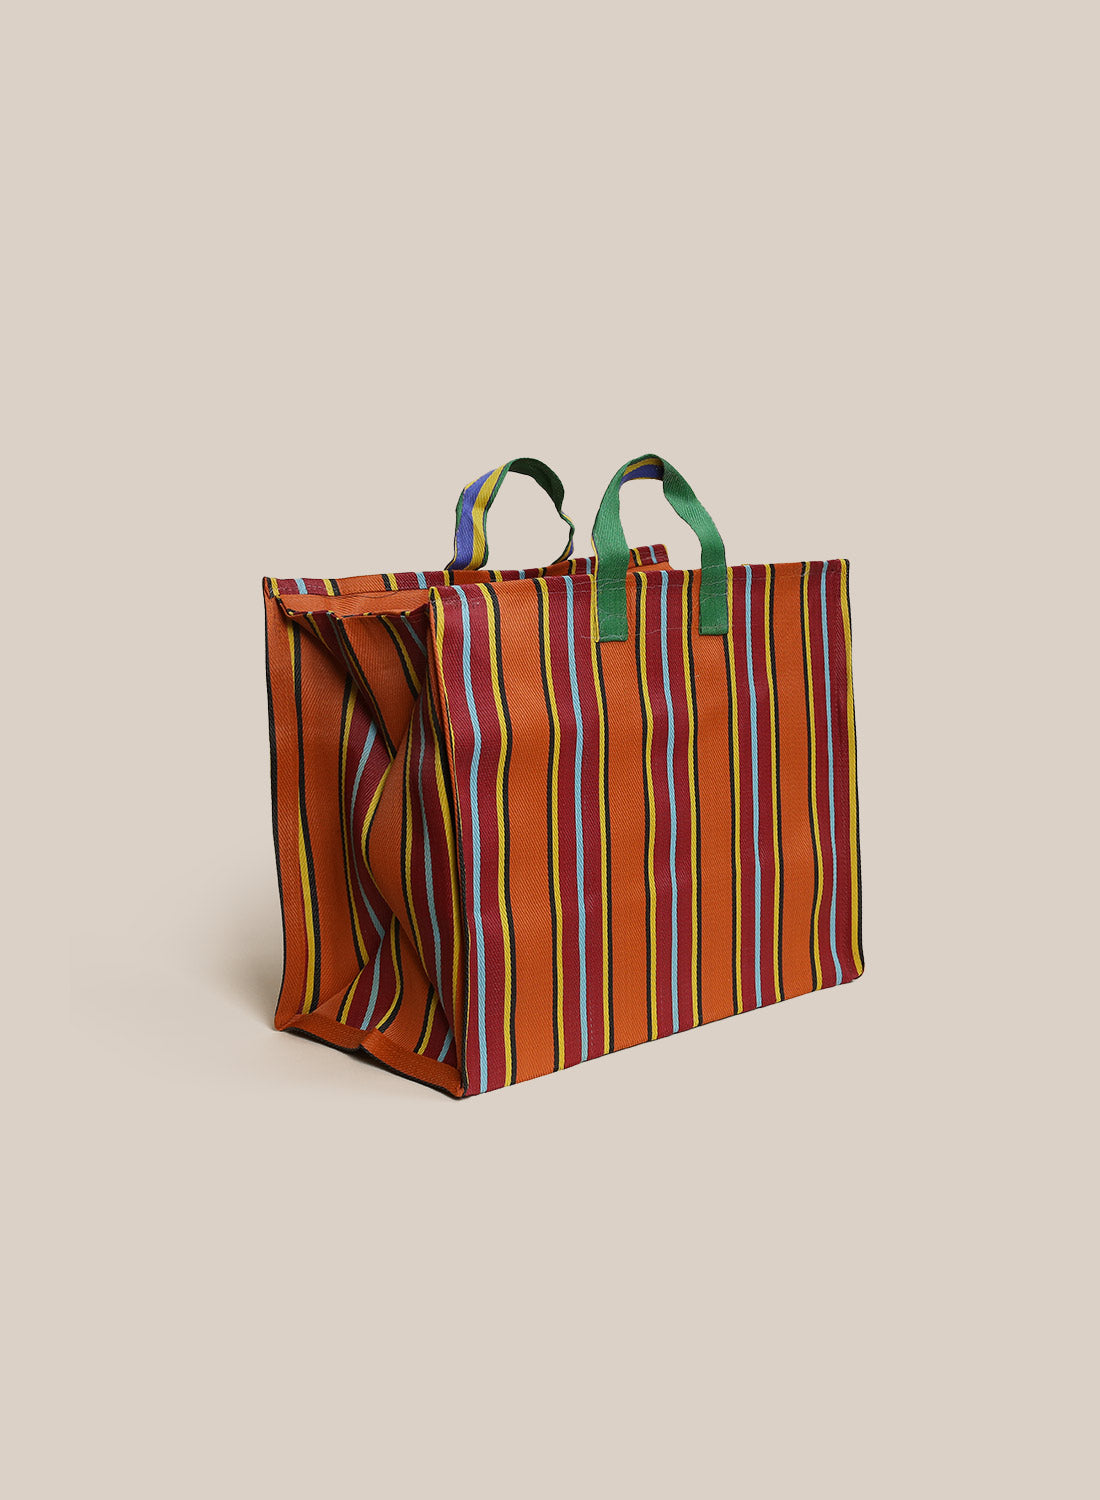 Day-to-Day Bag by Pan After - Large, Orange/Red